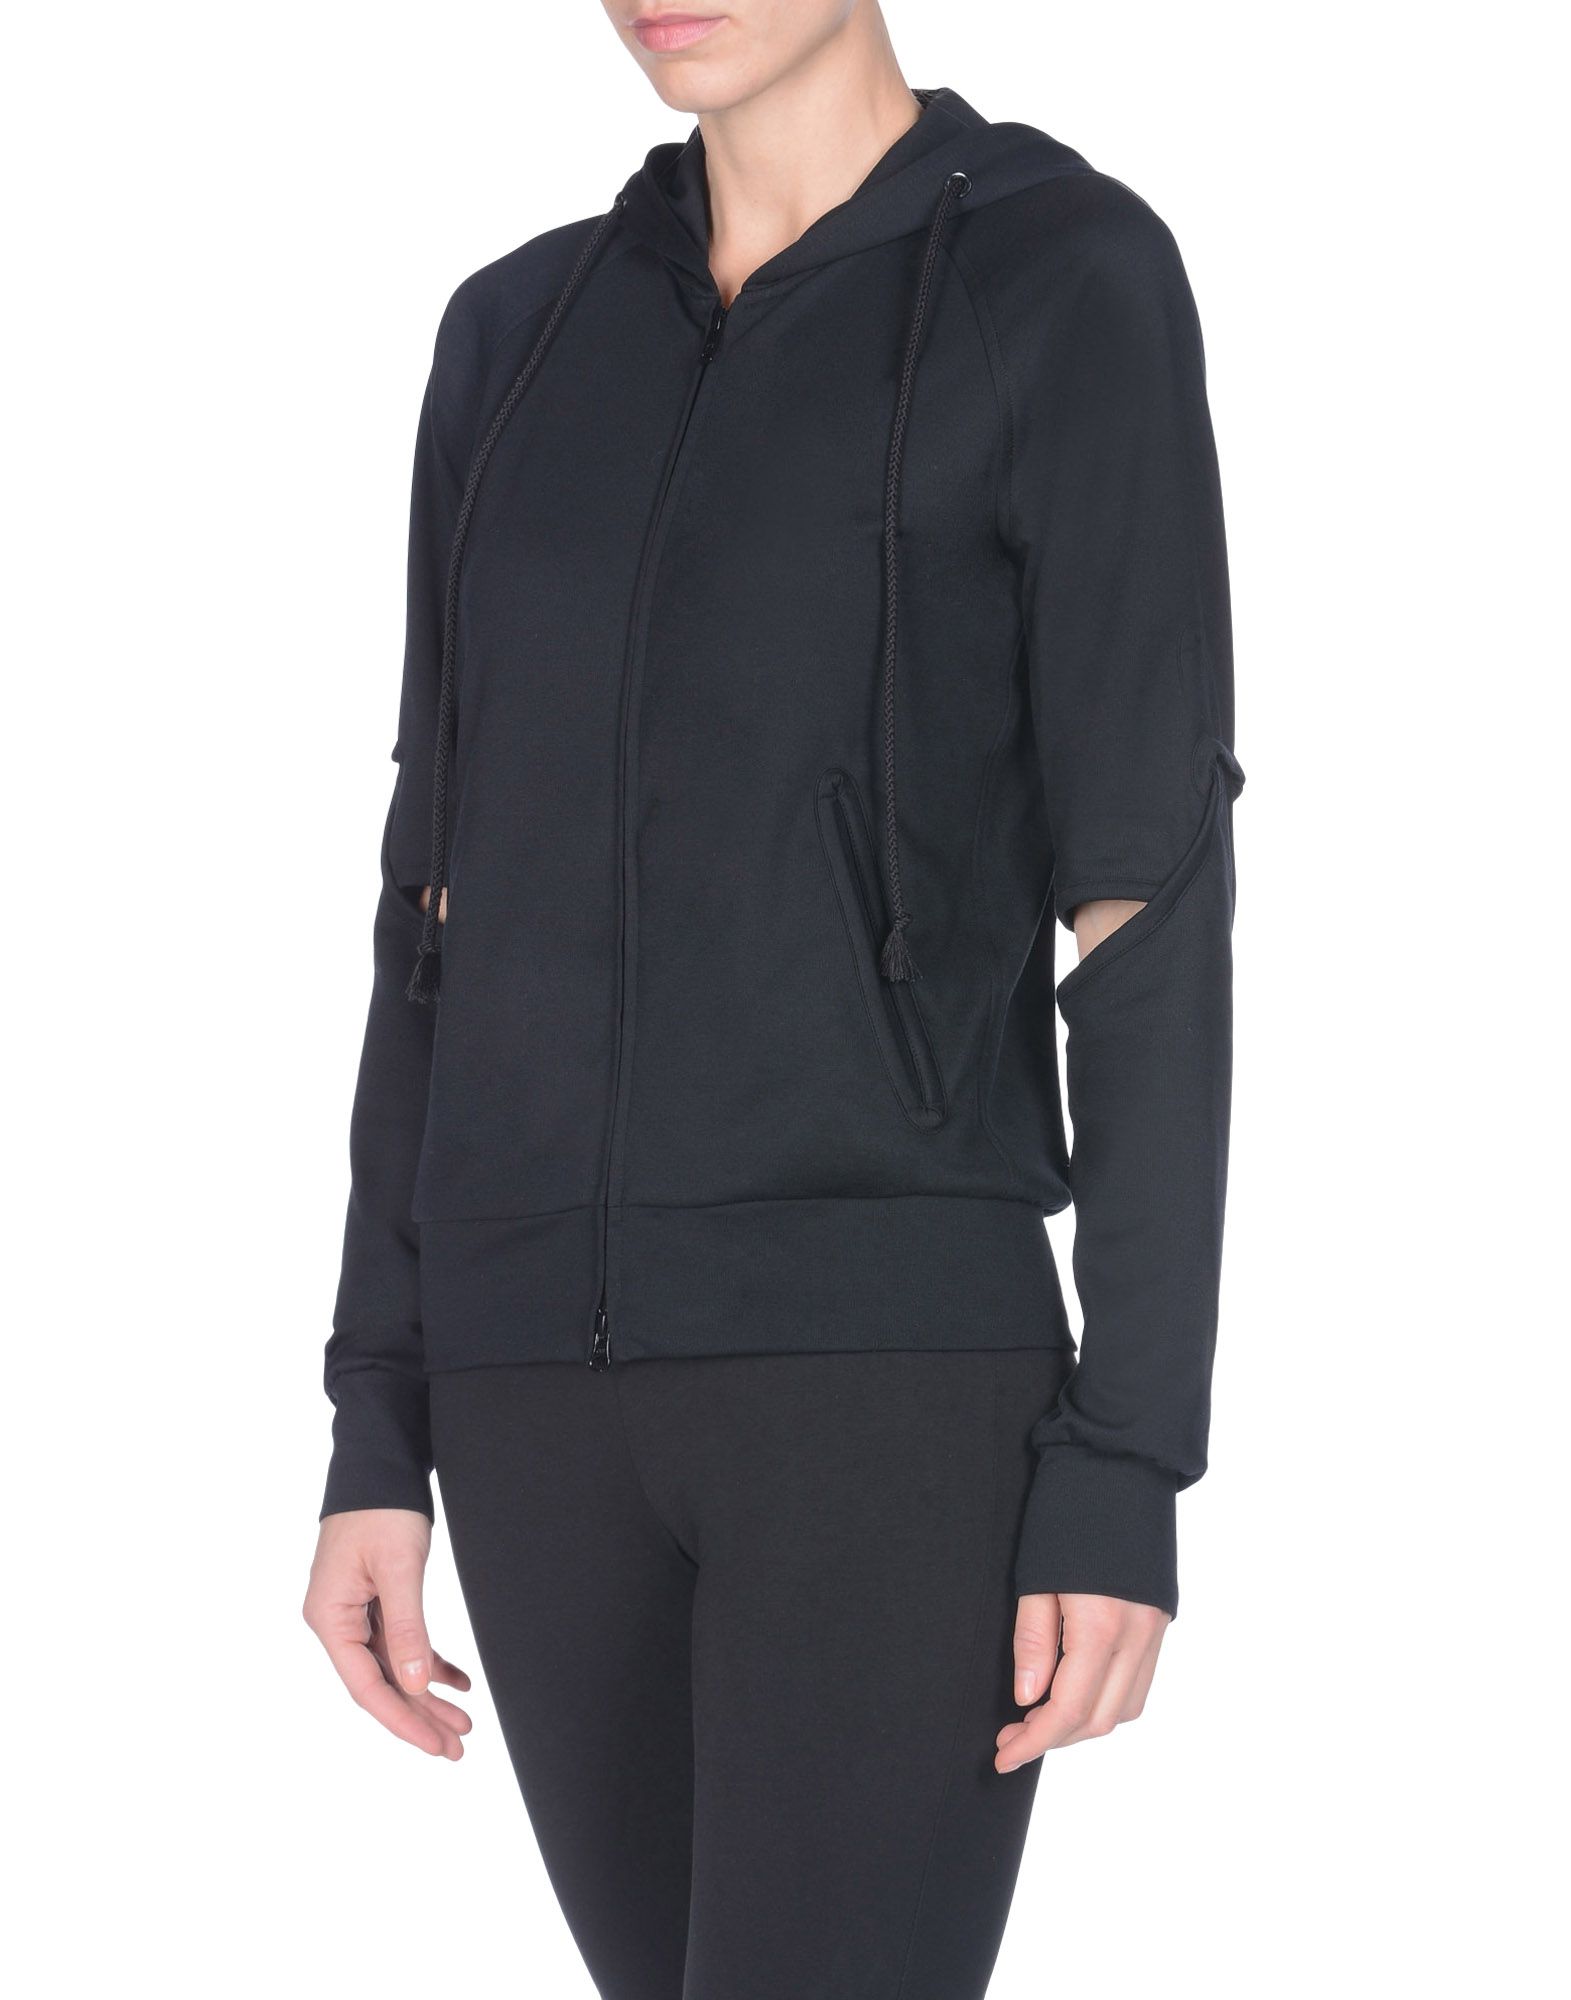 Y 3 LUX JACKET for Women | Adidas Y-3 Official Store